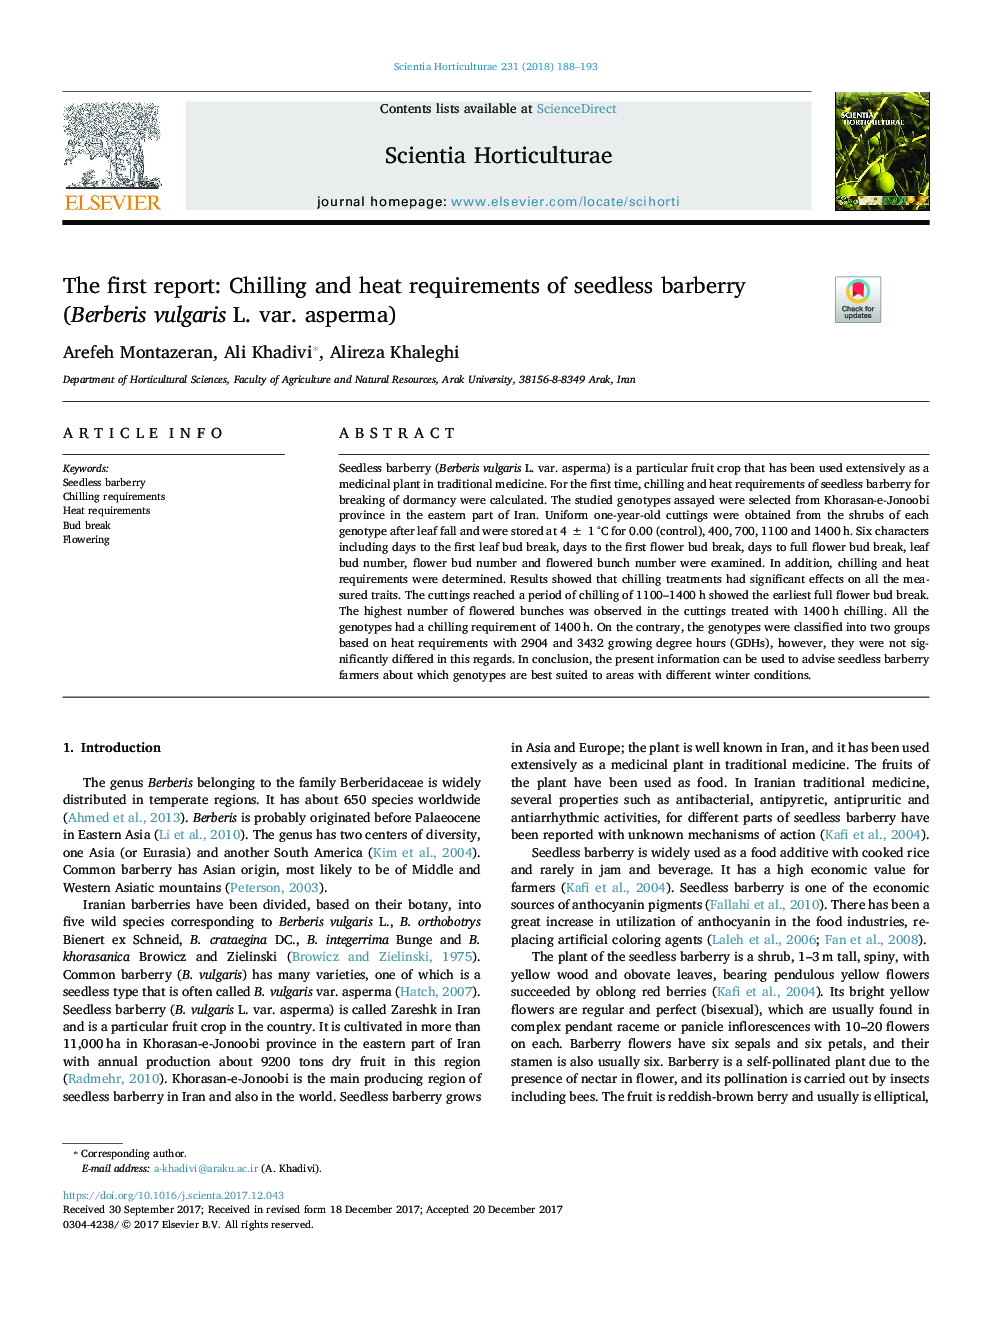 The first report: Chilling and heat requirements of seedless barberry (Berberis vulgaris L. var. asperma)